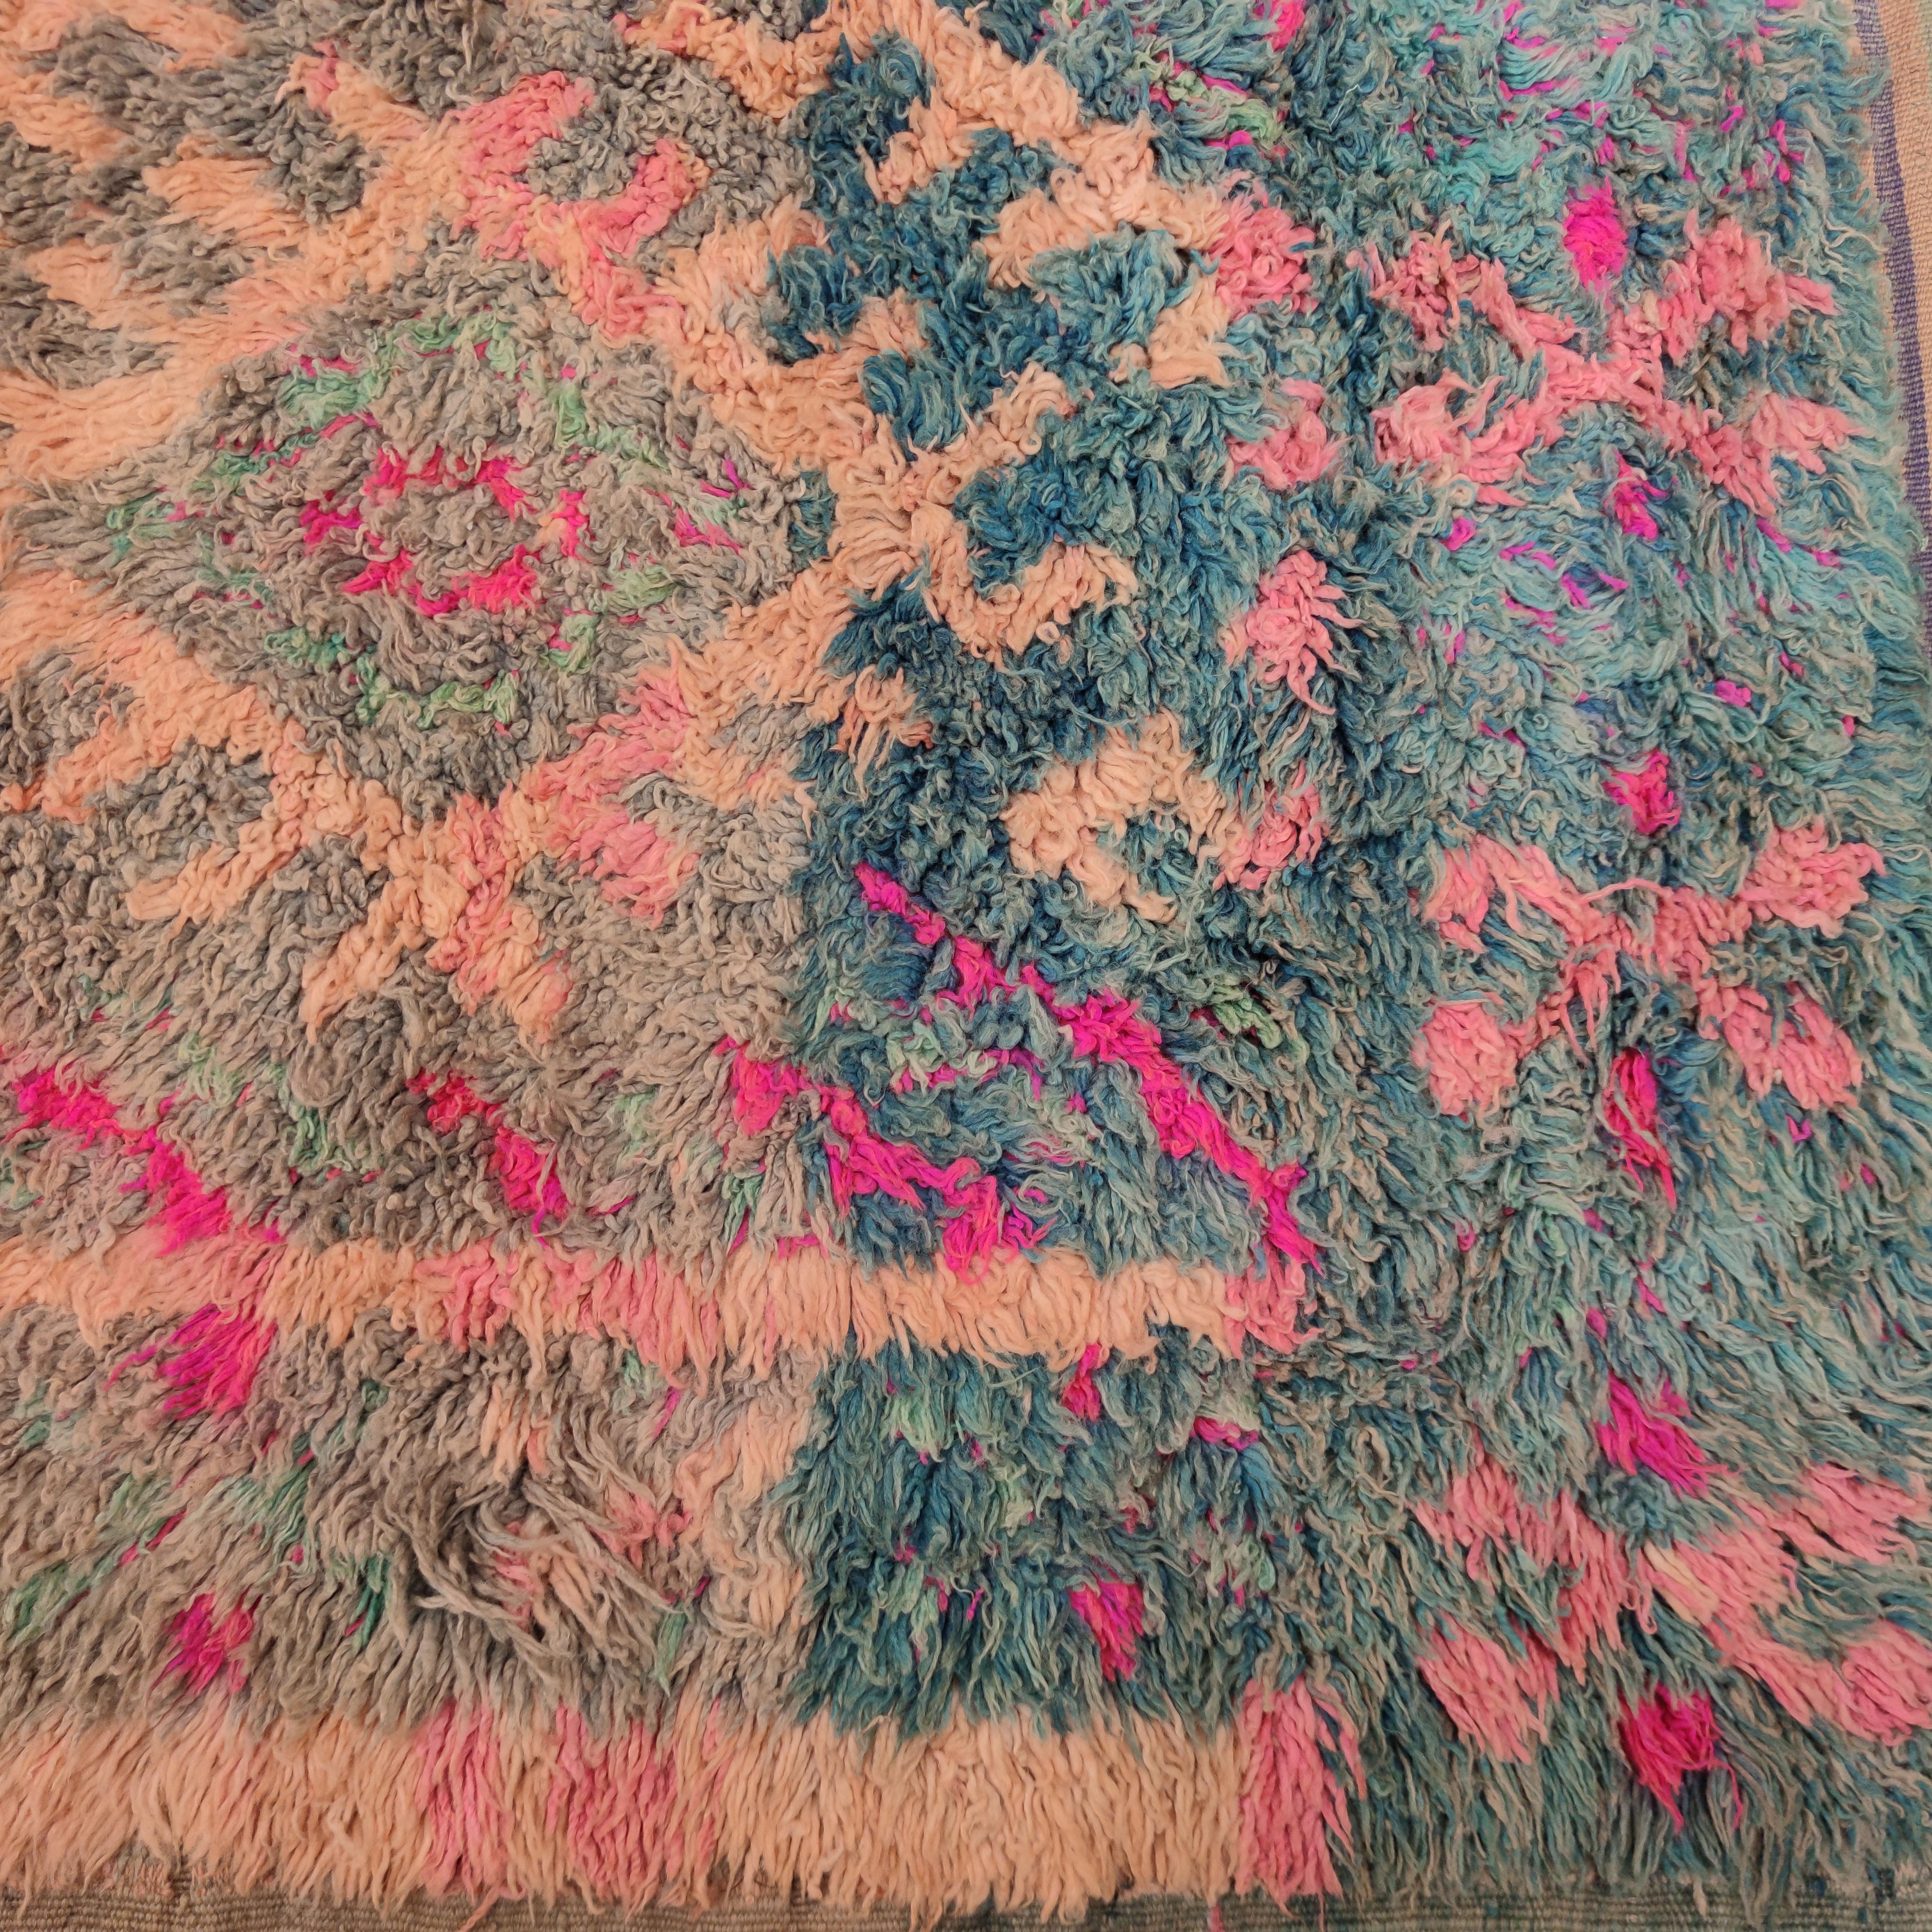 Distinguished by a very unusual palette composed of a blue-grey background and a design in various shades of pink, this Moroccan Berber rug originates from the area of Talsint, located in eastern Morocco near the border with Algeria, which is a